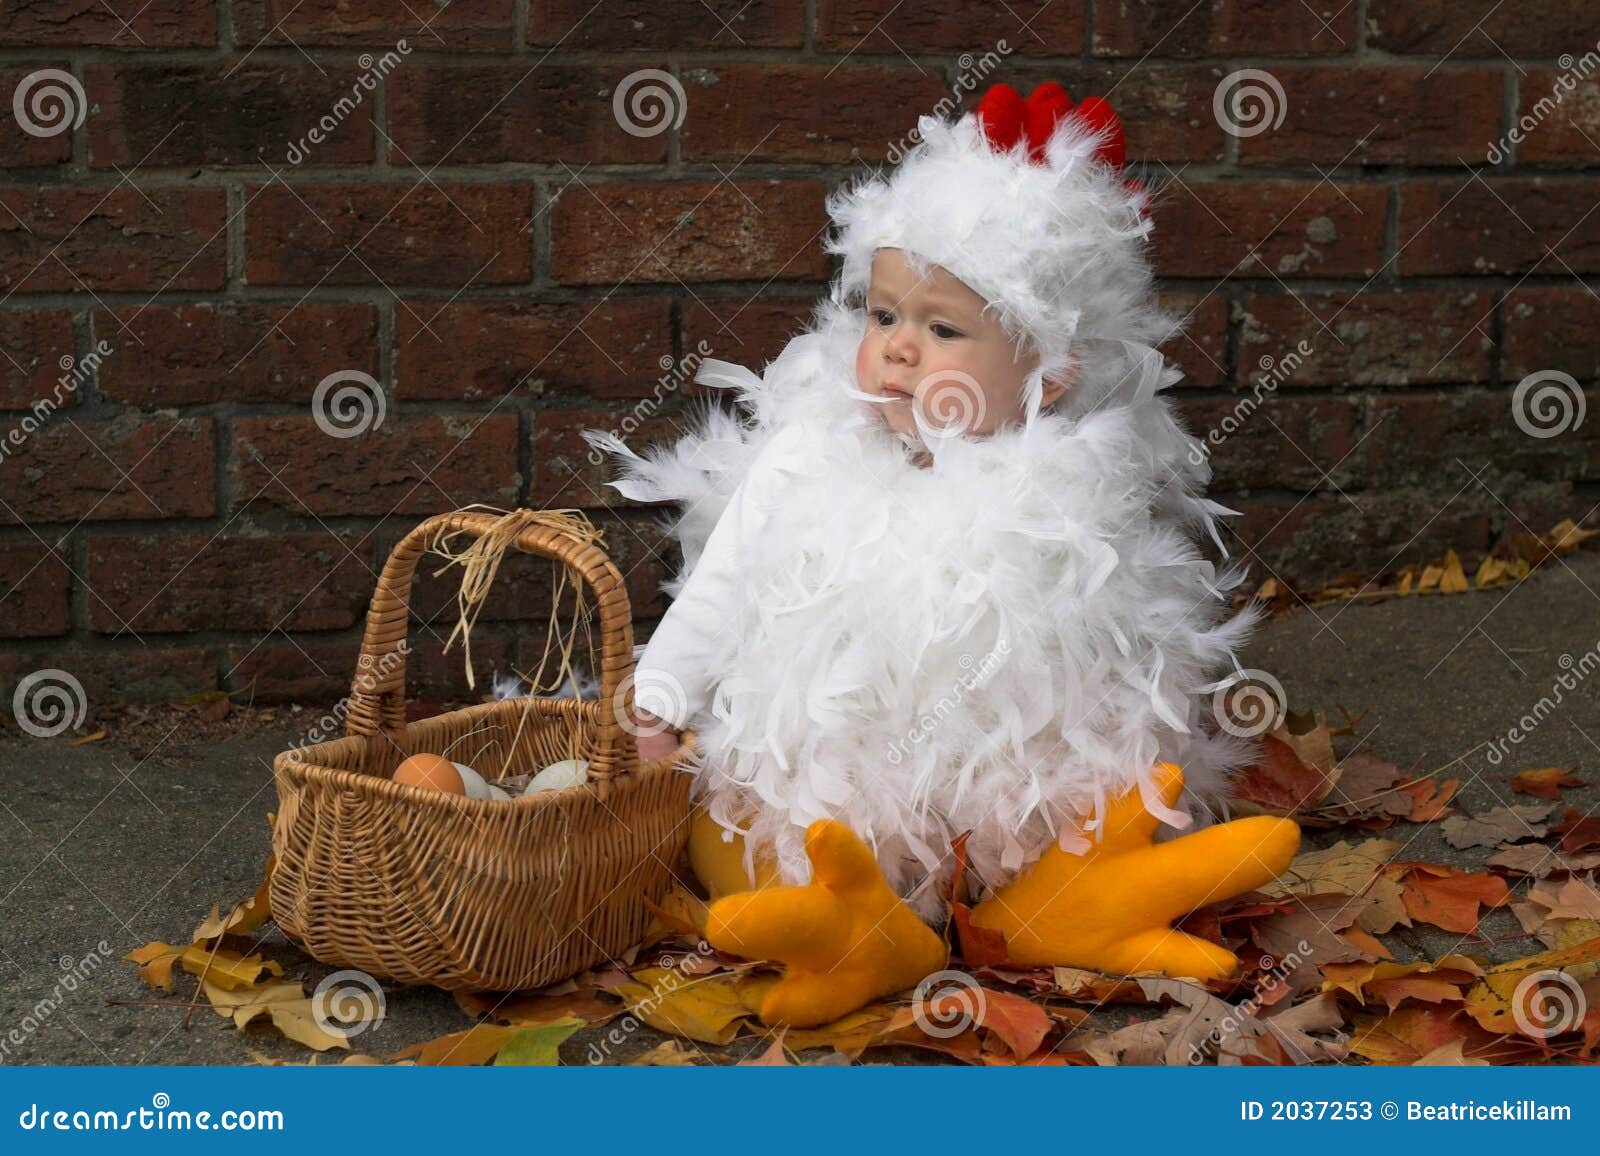 302 Baby Chicken Costume Stock Photos - Free & Royalty-Free Stock from Dreamstime